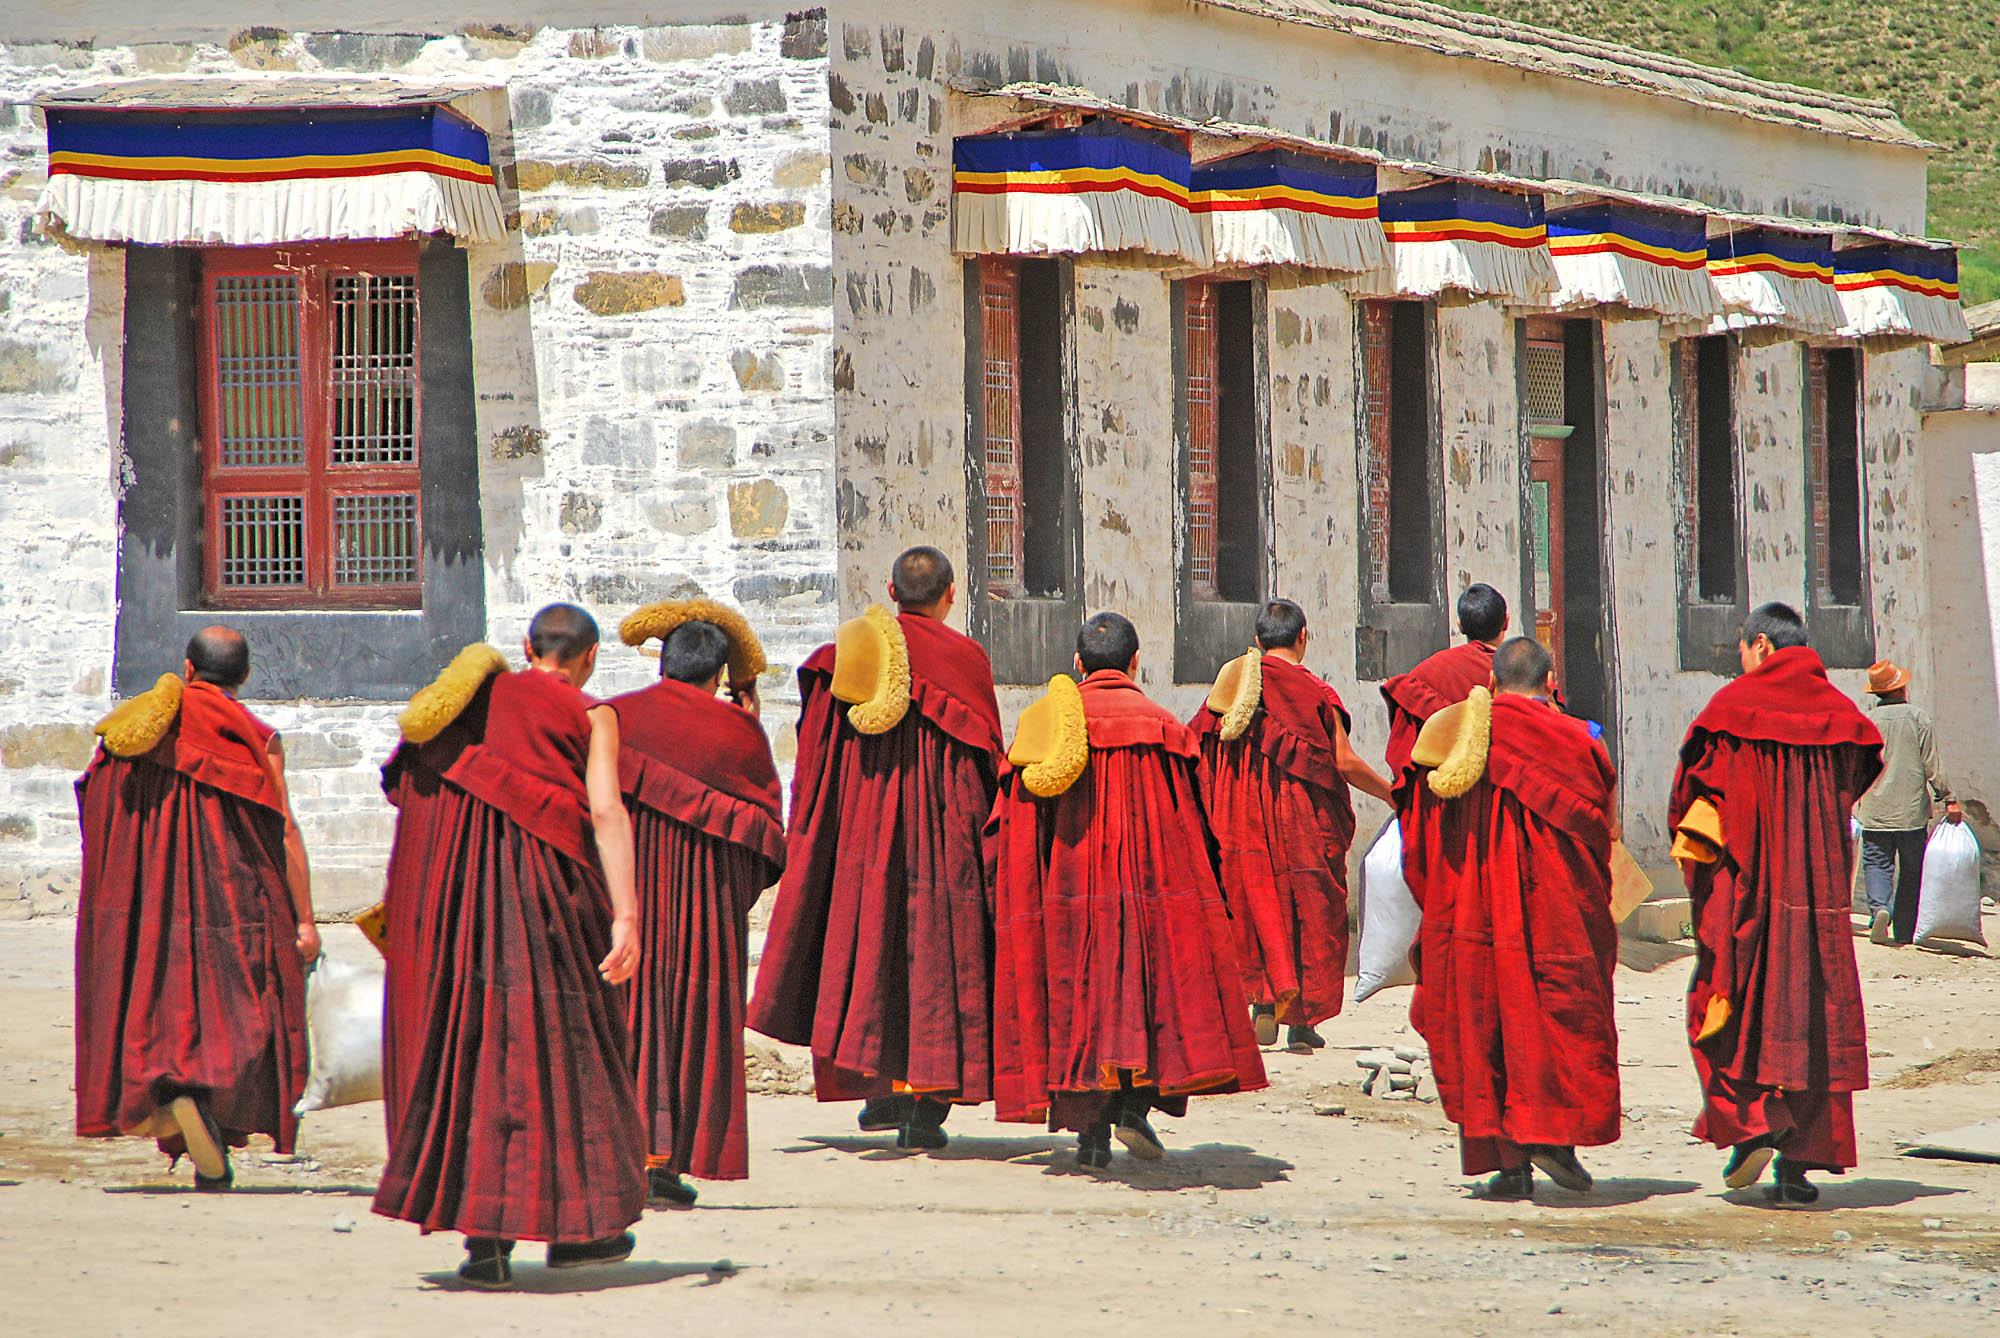 China Bans Reincarnation Of The Tibetan Monks In Order To Limit The Power